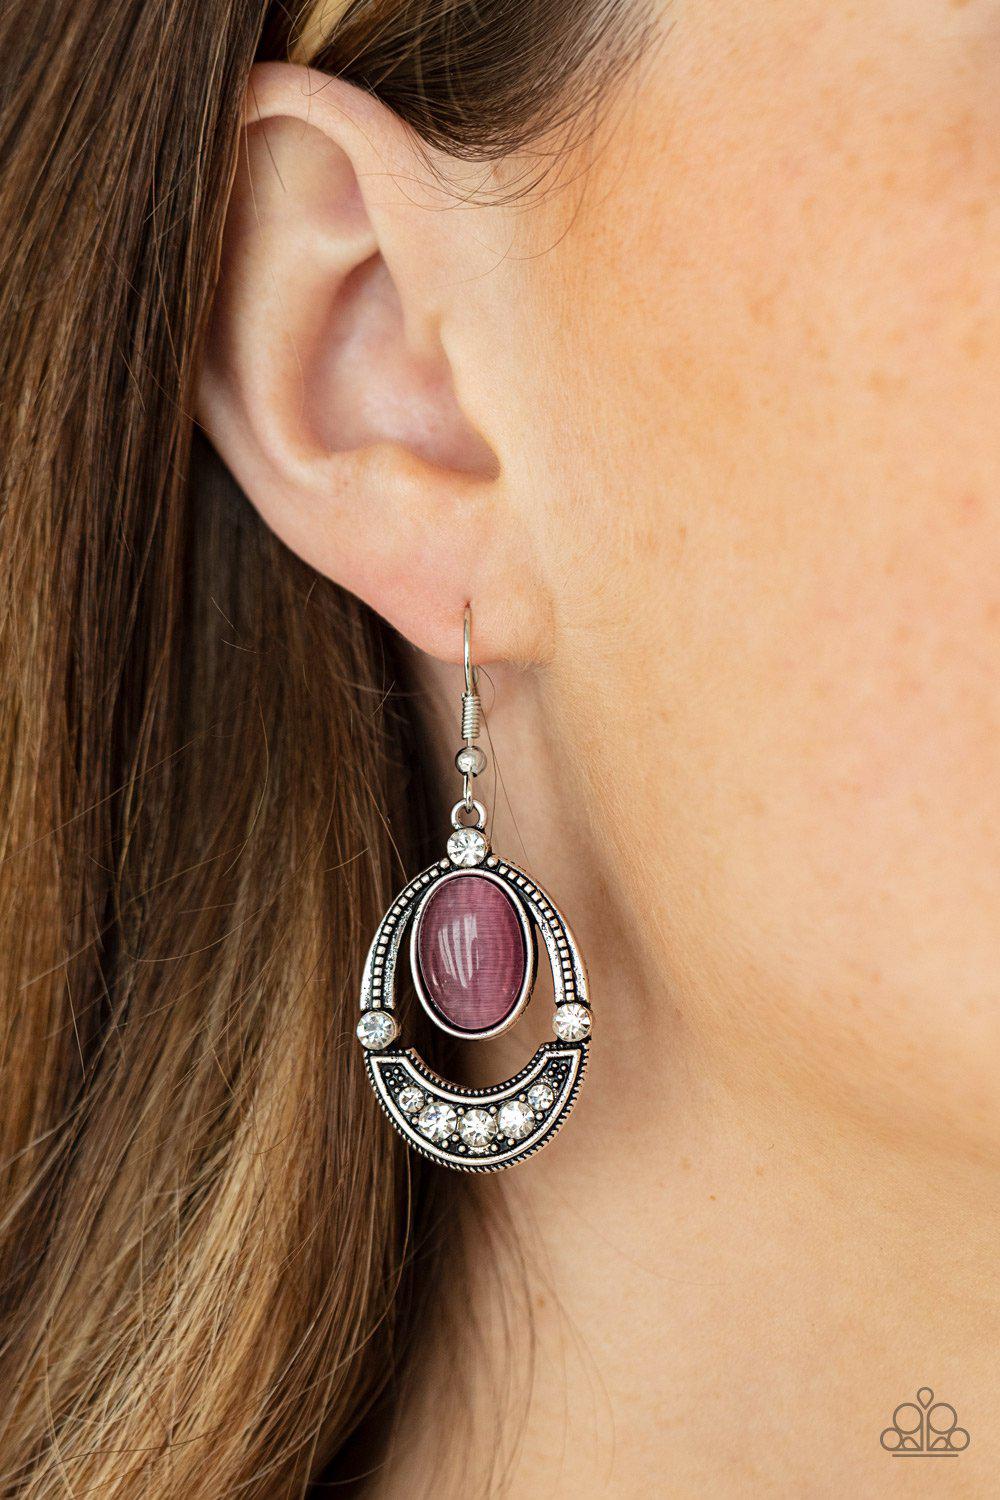 Serene Shimmer Purple Cat's Eye and White Rhinestone Earrings - Paparazzi Accessories- lightbox - CarasShop.com - $5 Jewelry by Cara Jewels